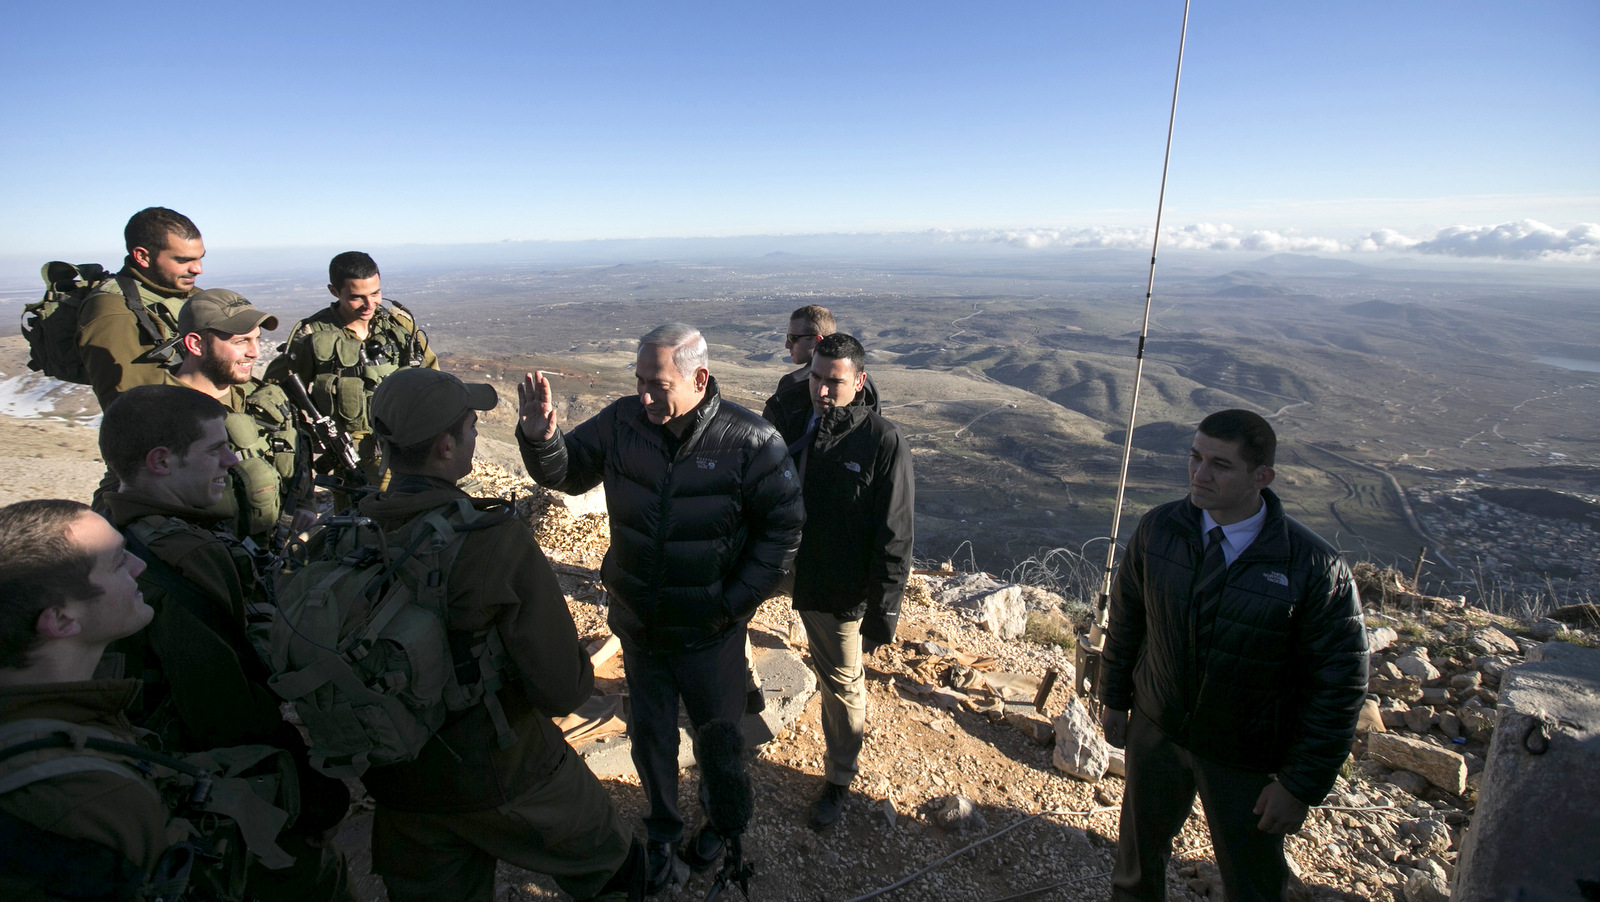 Israel's Prime Minister Benjamin Netanyahu, center, talks with Israeli soldiers at a military outpost during a visit at Mount Hermon in the Israeli-occupied Golan Heights overlooking the Israel-Syria border on, Feb. 4, 2015. Baz Ratner | AP